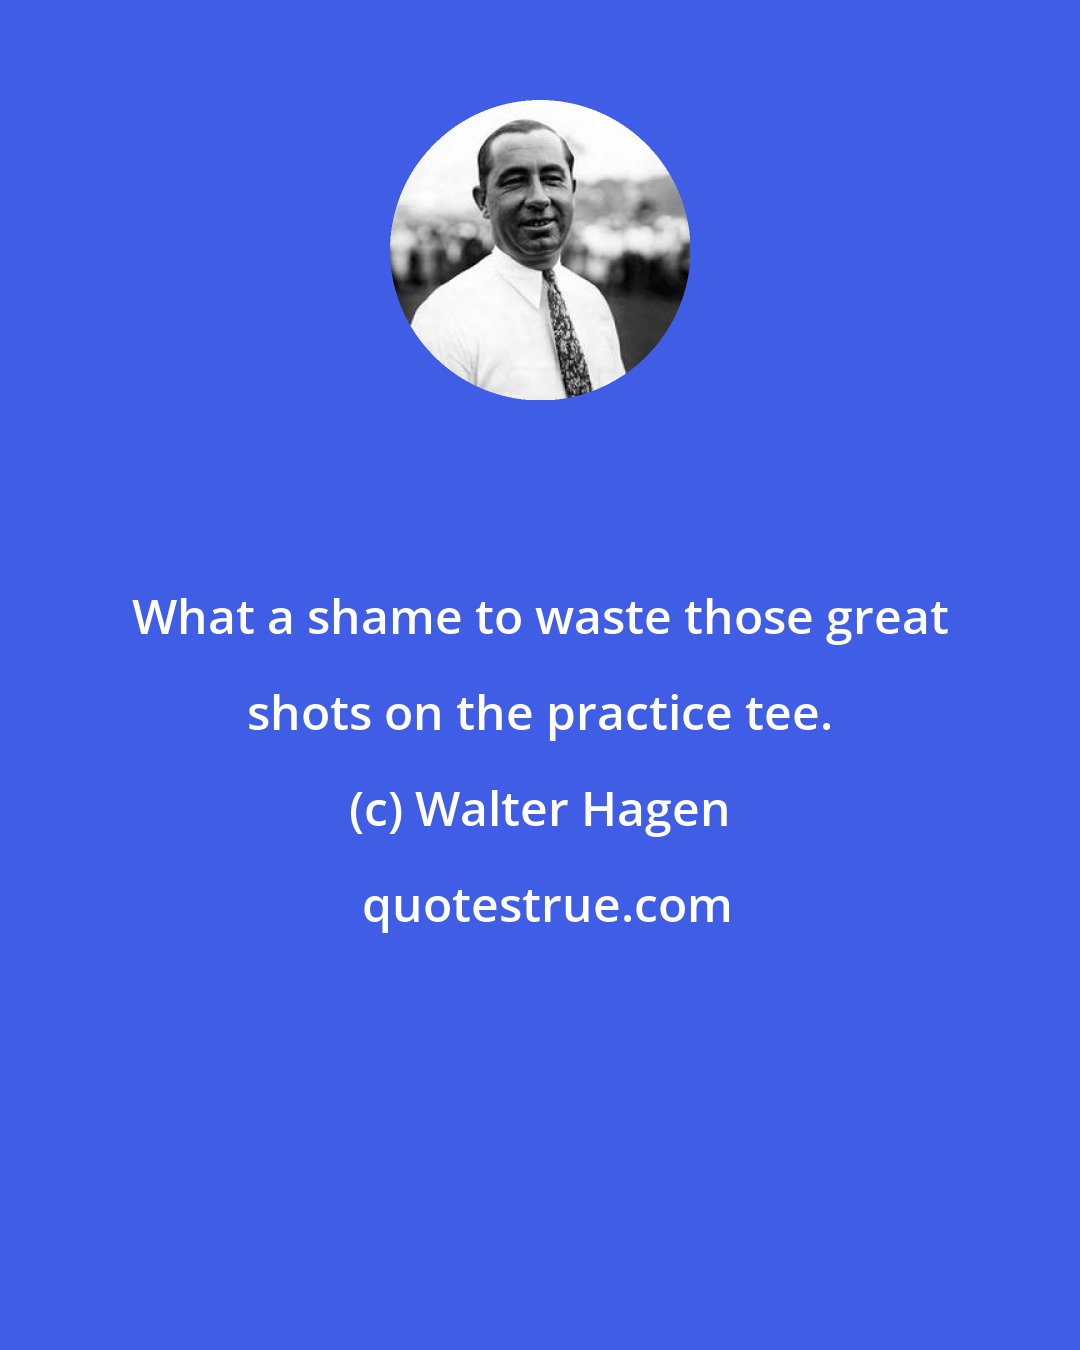 Walter Hagen: What a shame to waste those great shots on the practice tee.